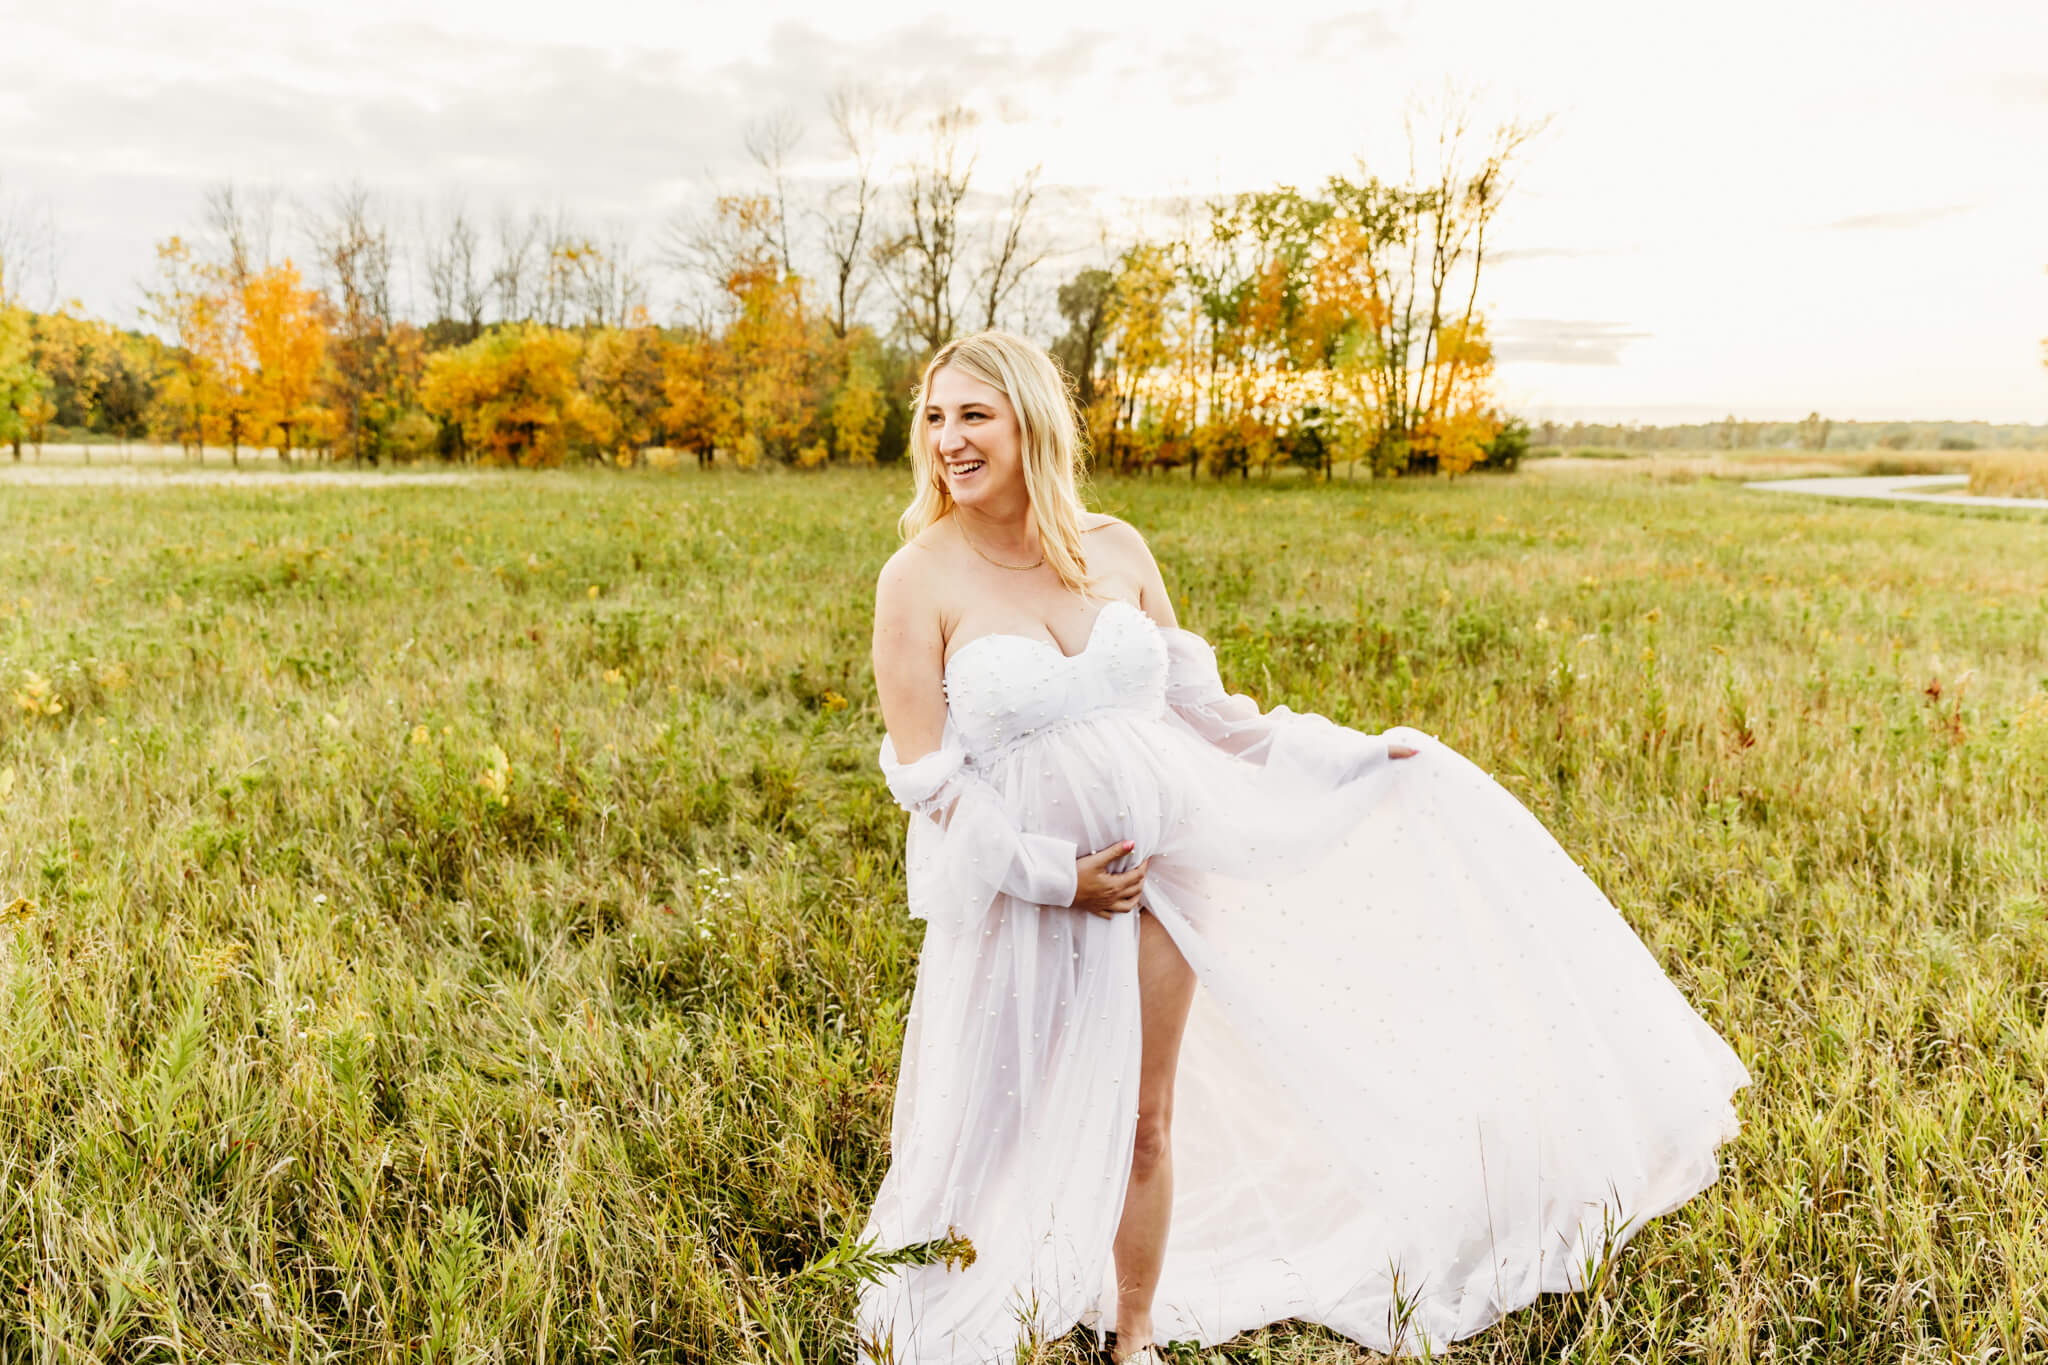 pregnant woman dancing in her white gown in a field at sunset